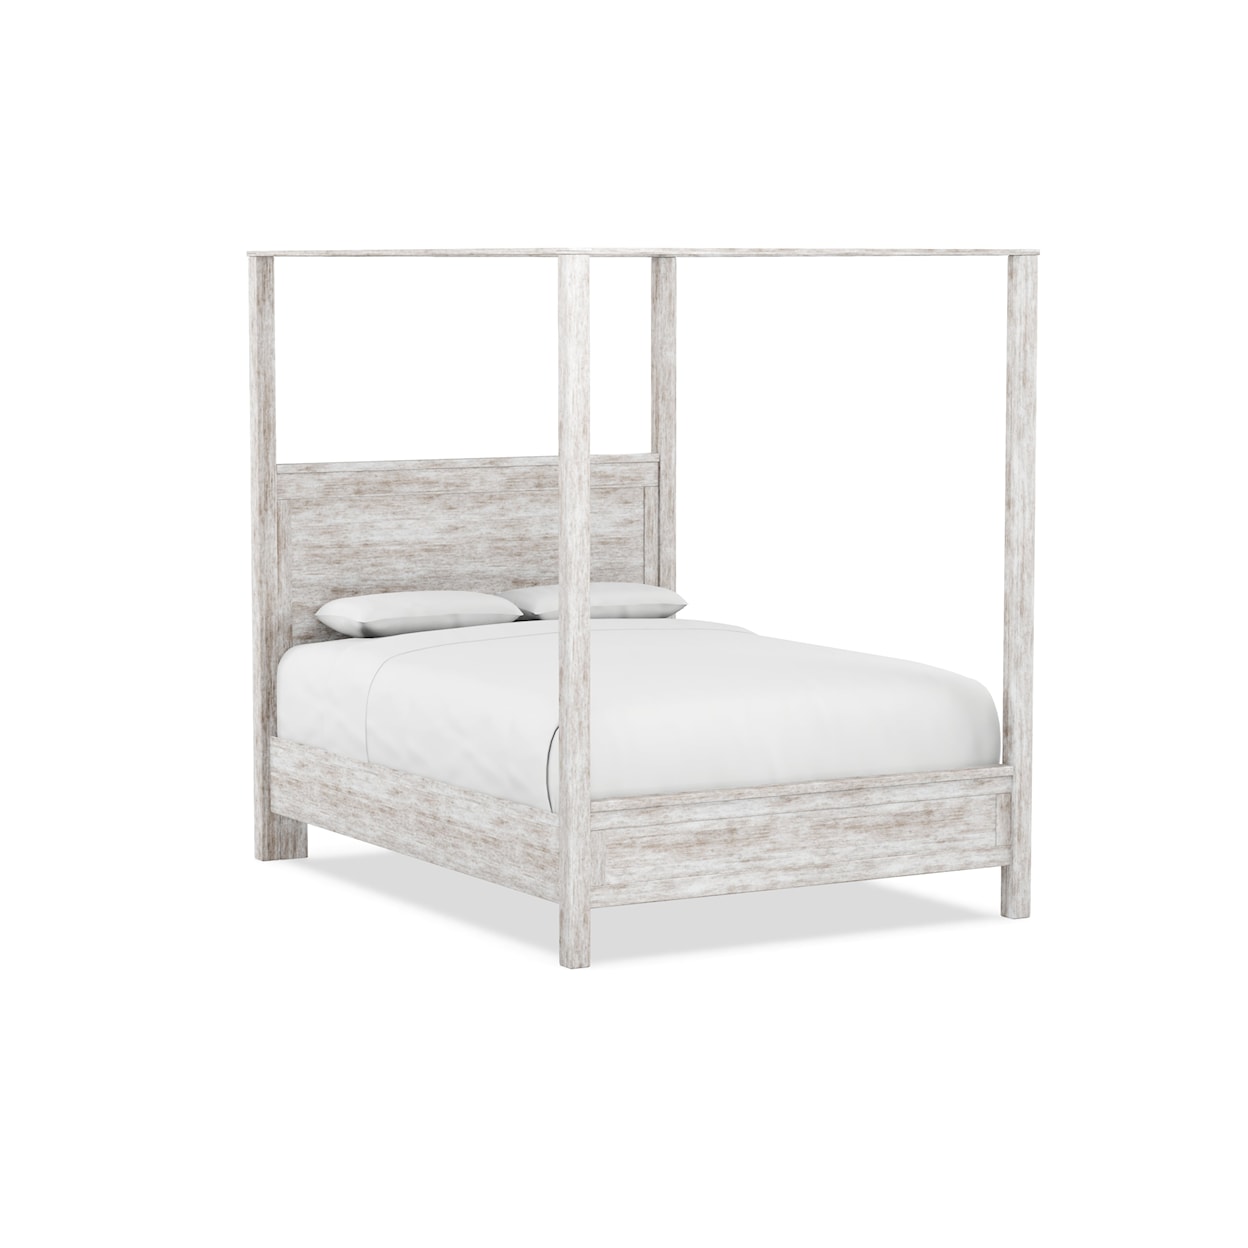 Durham Studio 19 Queen Poster Bed with Canopy